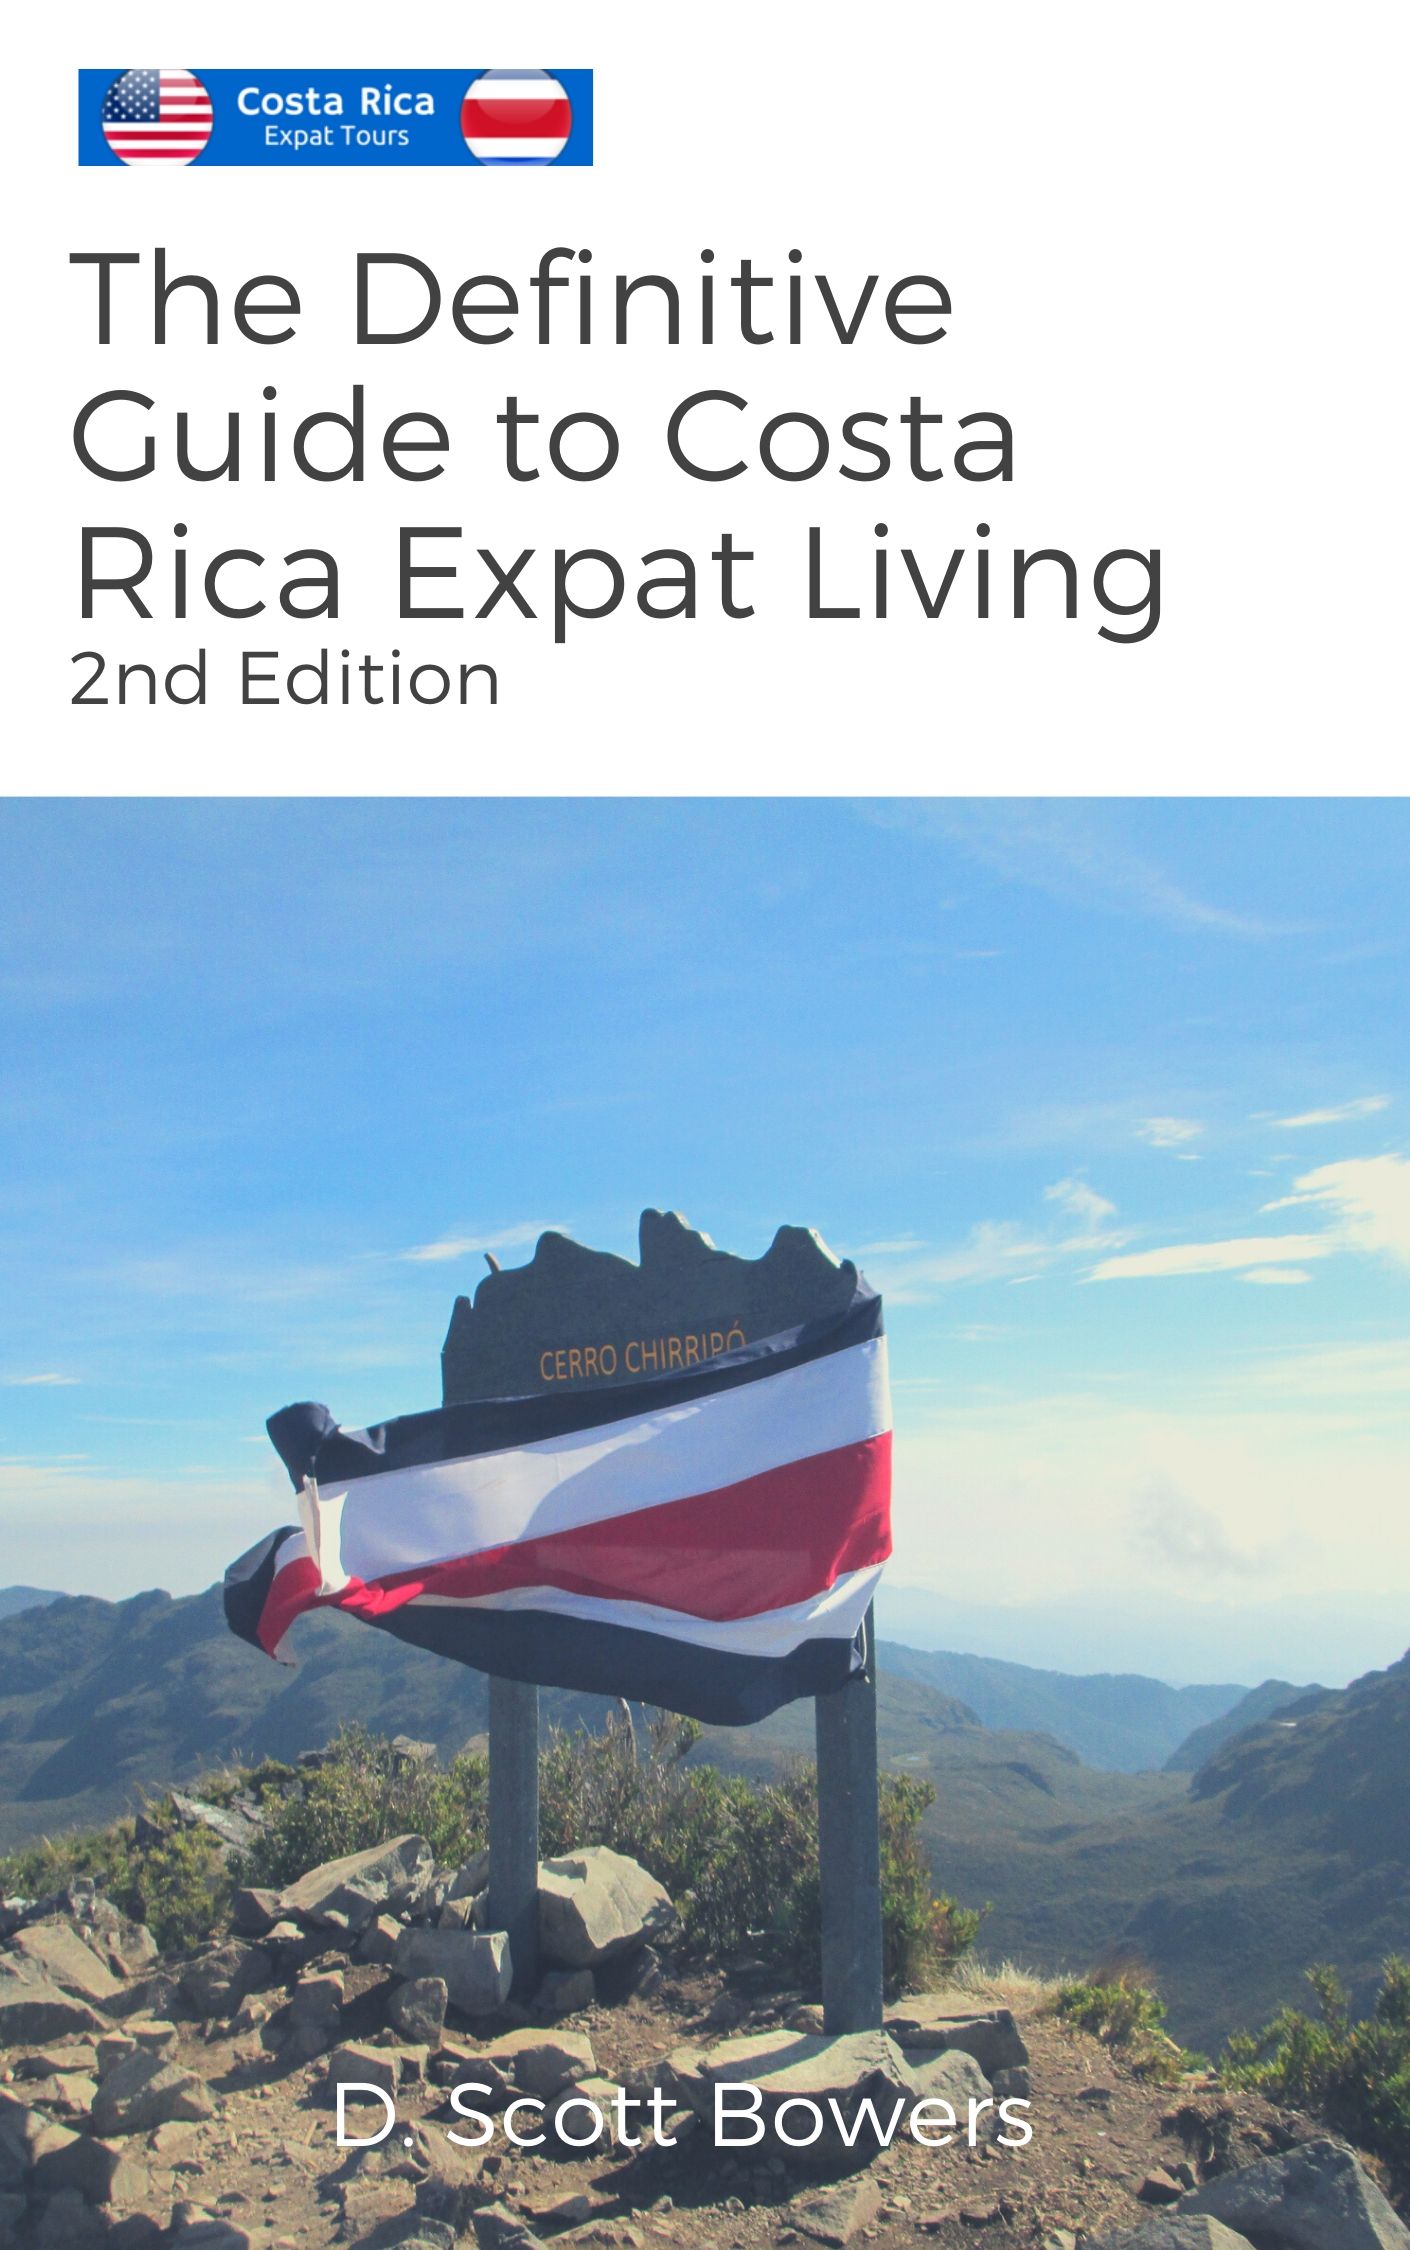 The Definitive Guide to Costa Rica Expat Living - 2nd Edition